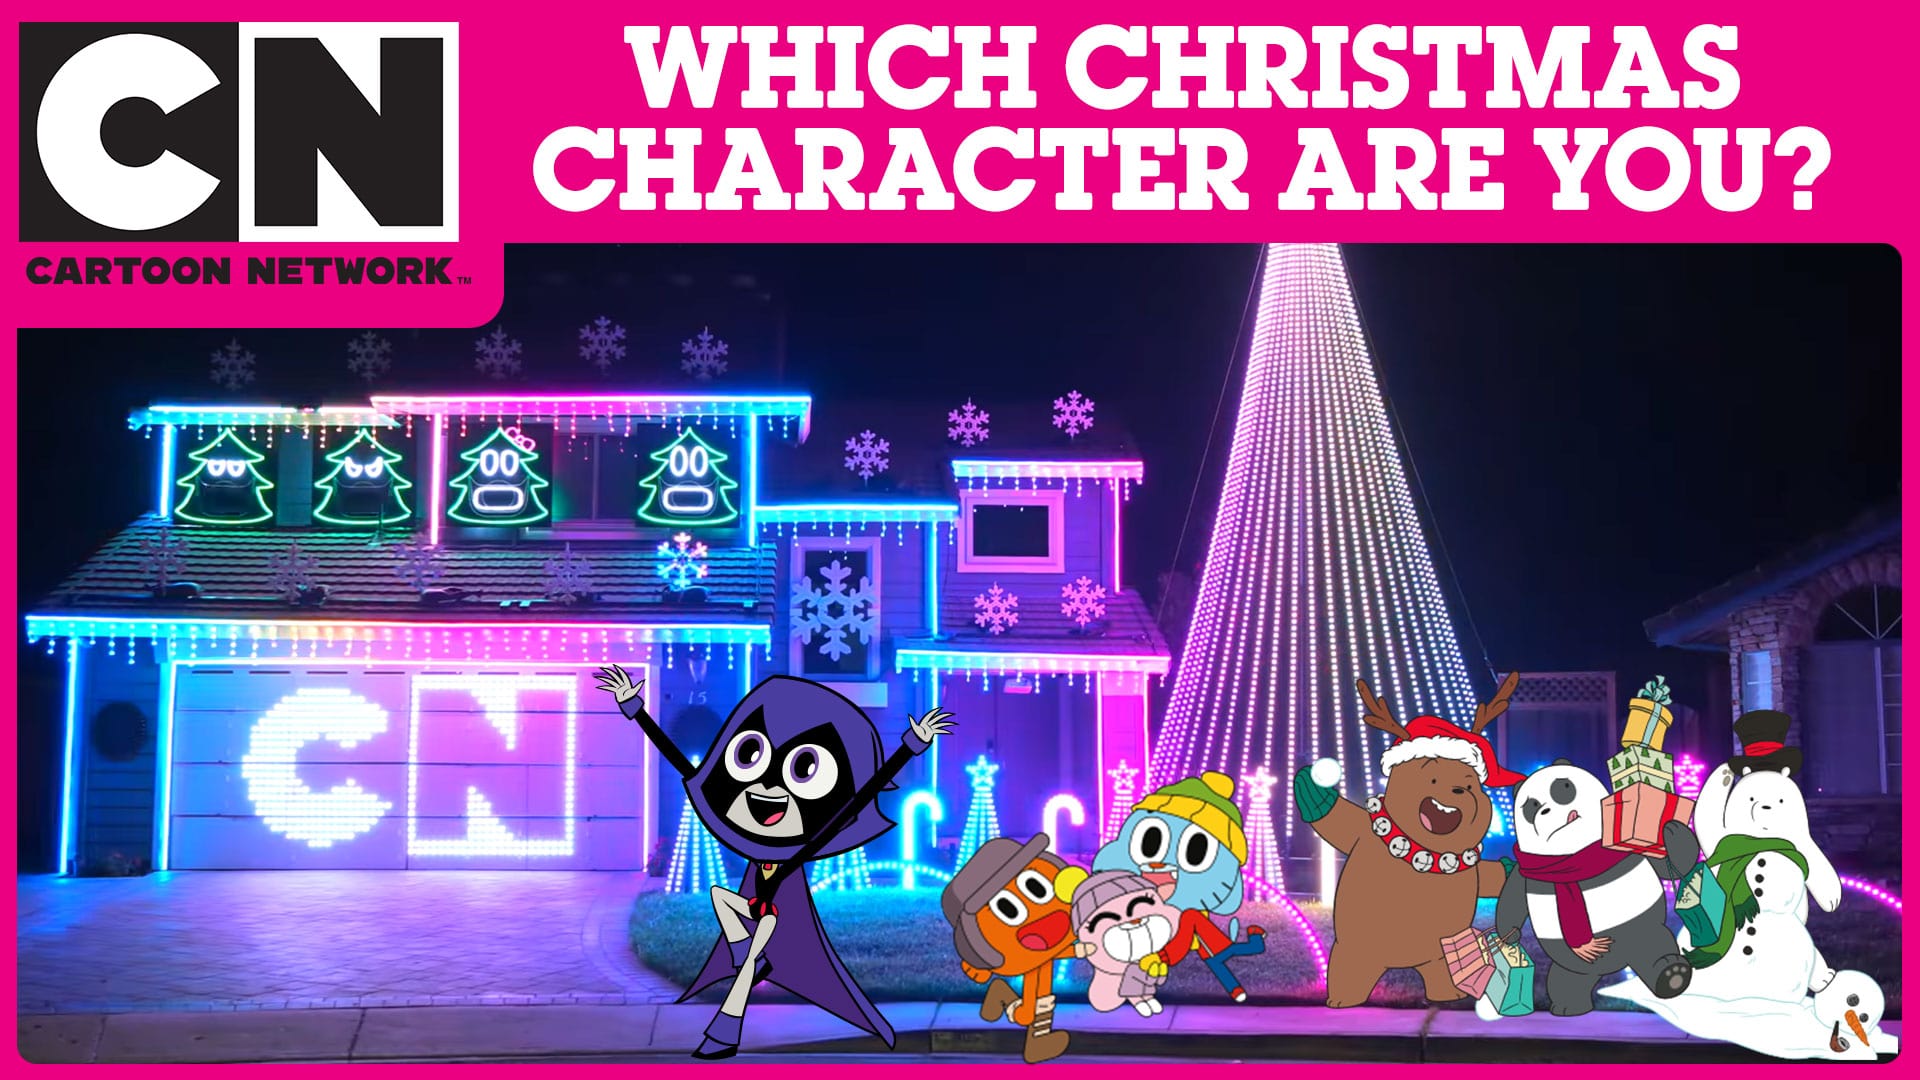 QUIZ: Which Cartoon Network Christmas character are you?